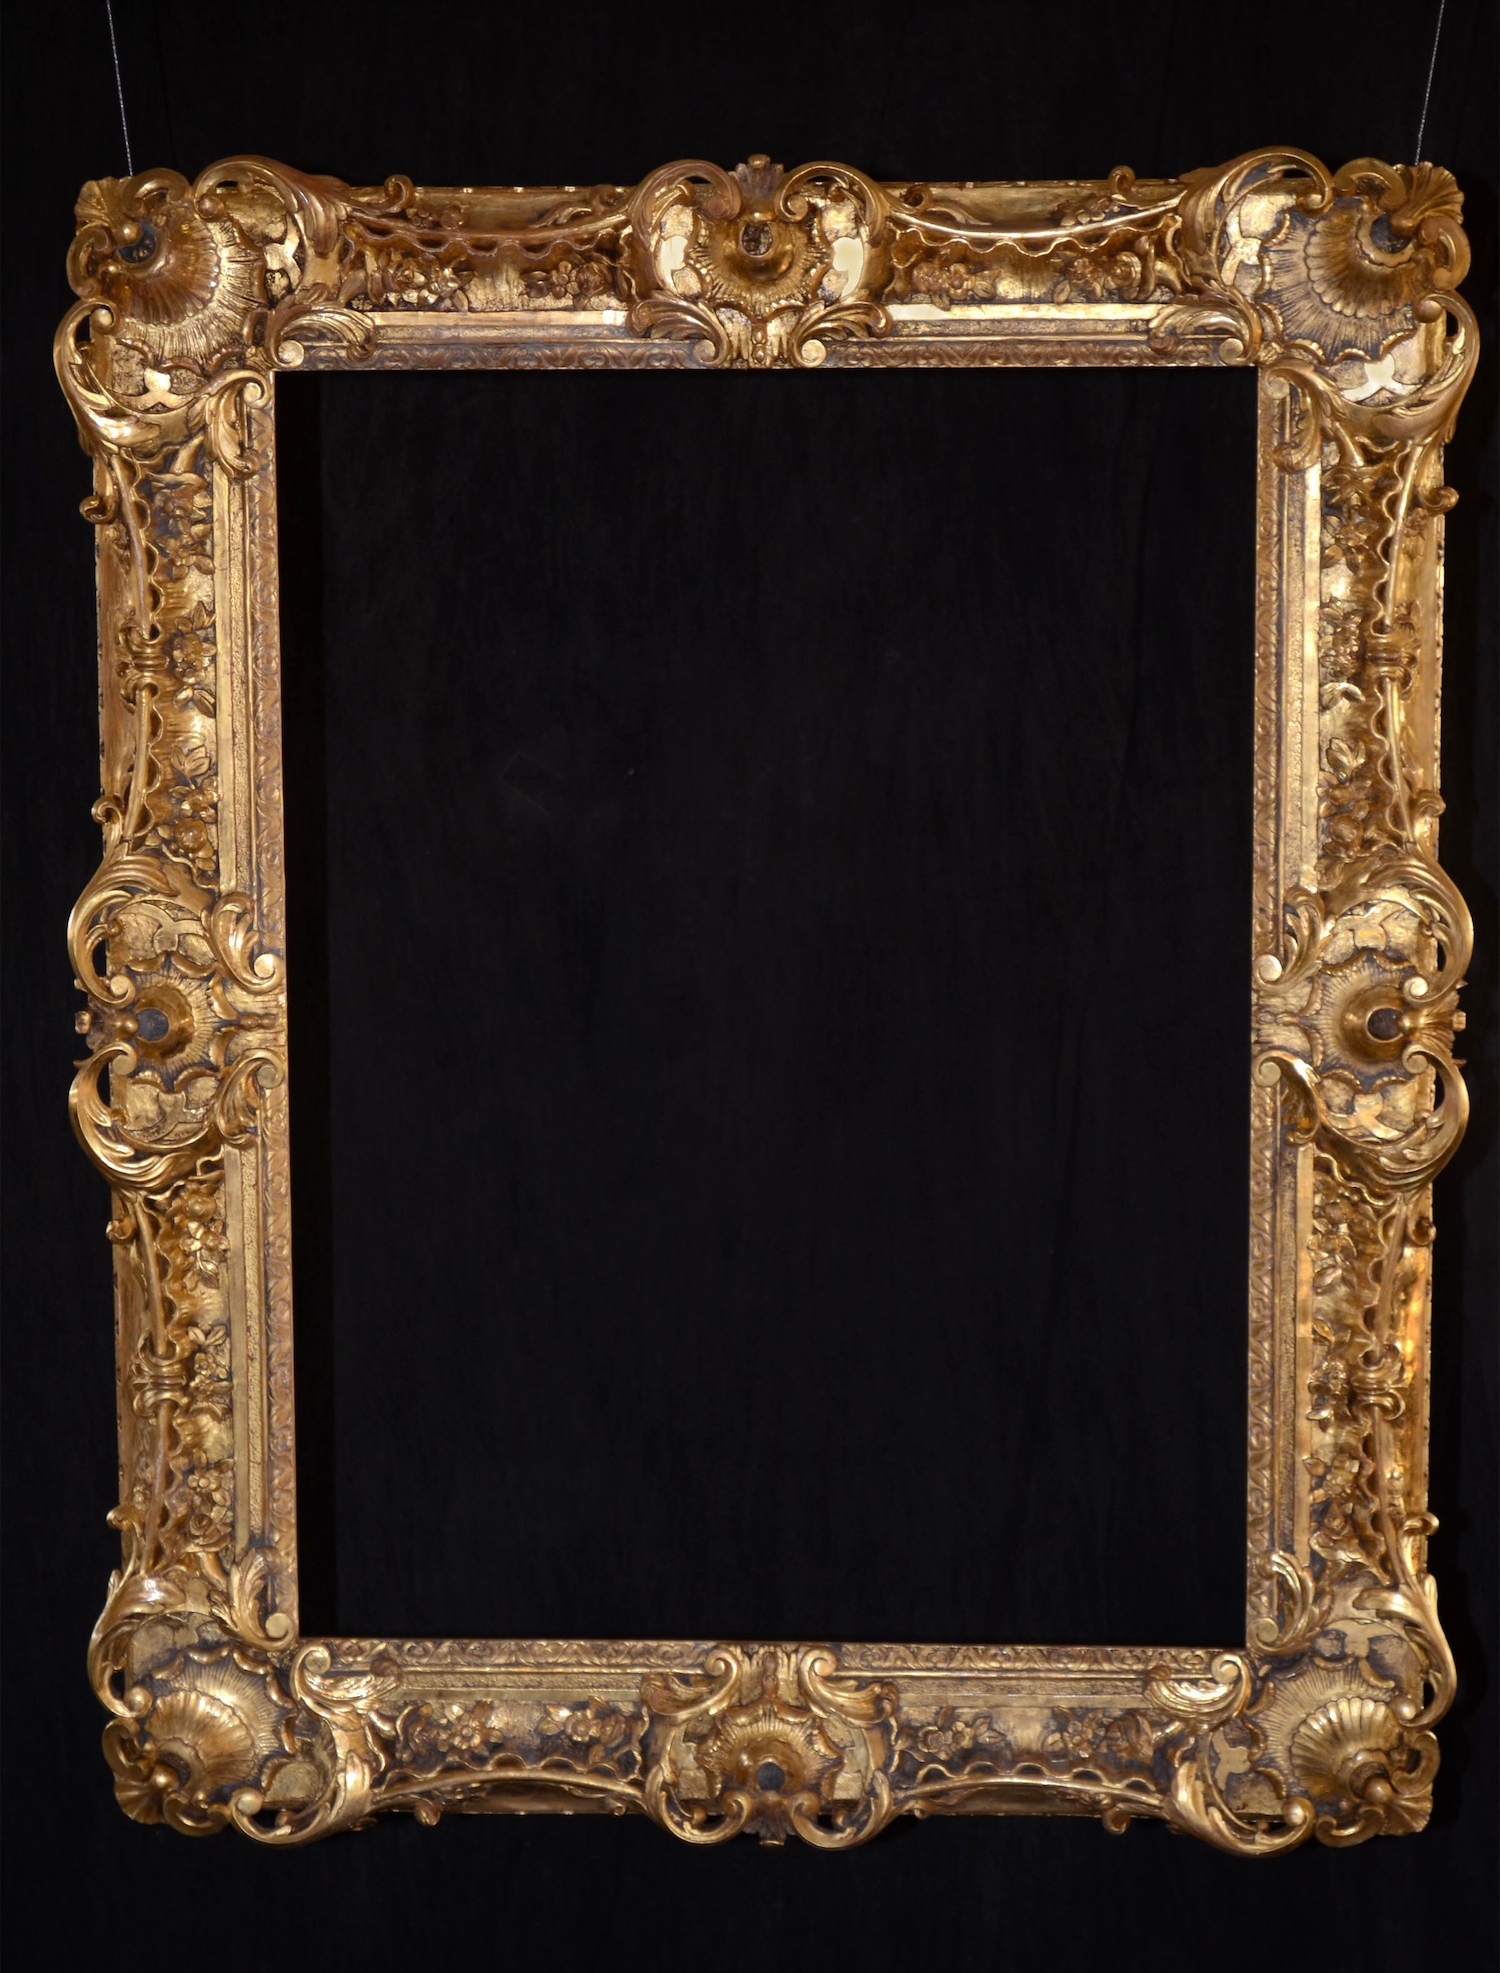   This rococo style frame measures 40" wide and 50" high.&nbsp; It was created using a single photograph provided by the customer.&nbsp; It is water gilt in 23 kt gold, burnished and distressed.&nbsp;  